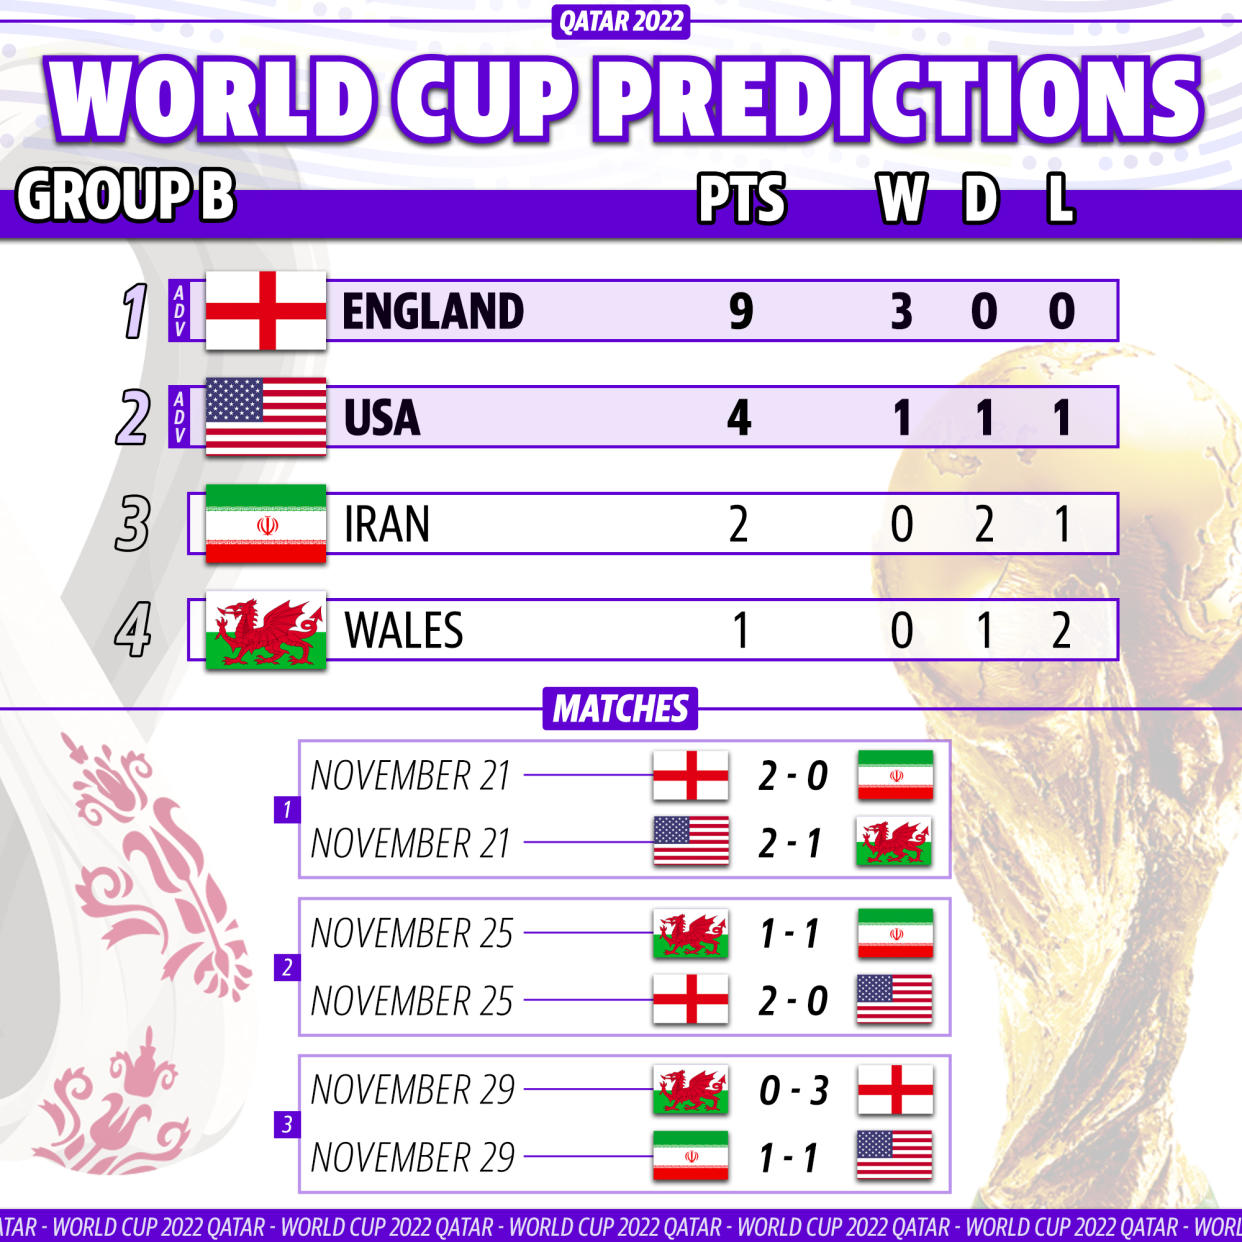 Yahoo Sports soccer writer Henry Bushnell's prediction for how Group B plays out at the 2022 World Cup. (Graphic by Michael Wagstaffe/Yahoo Sports)